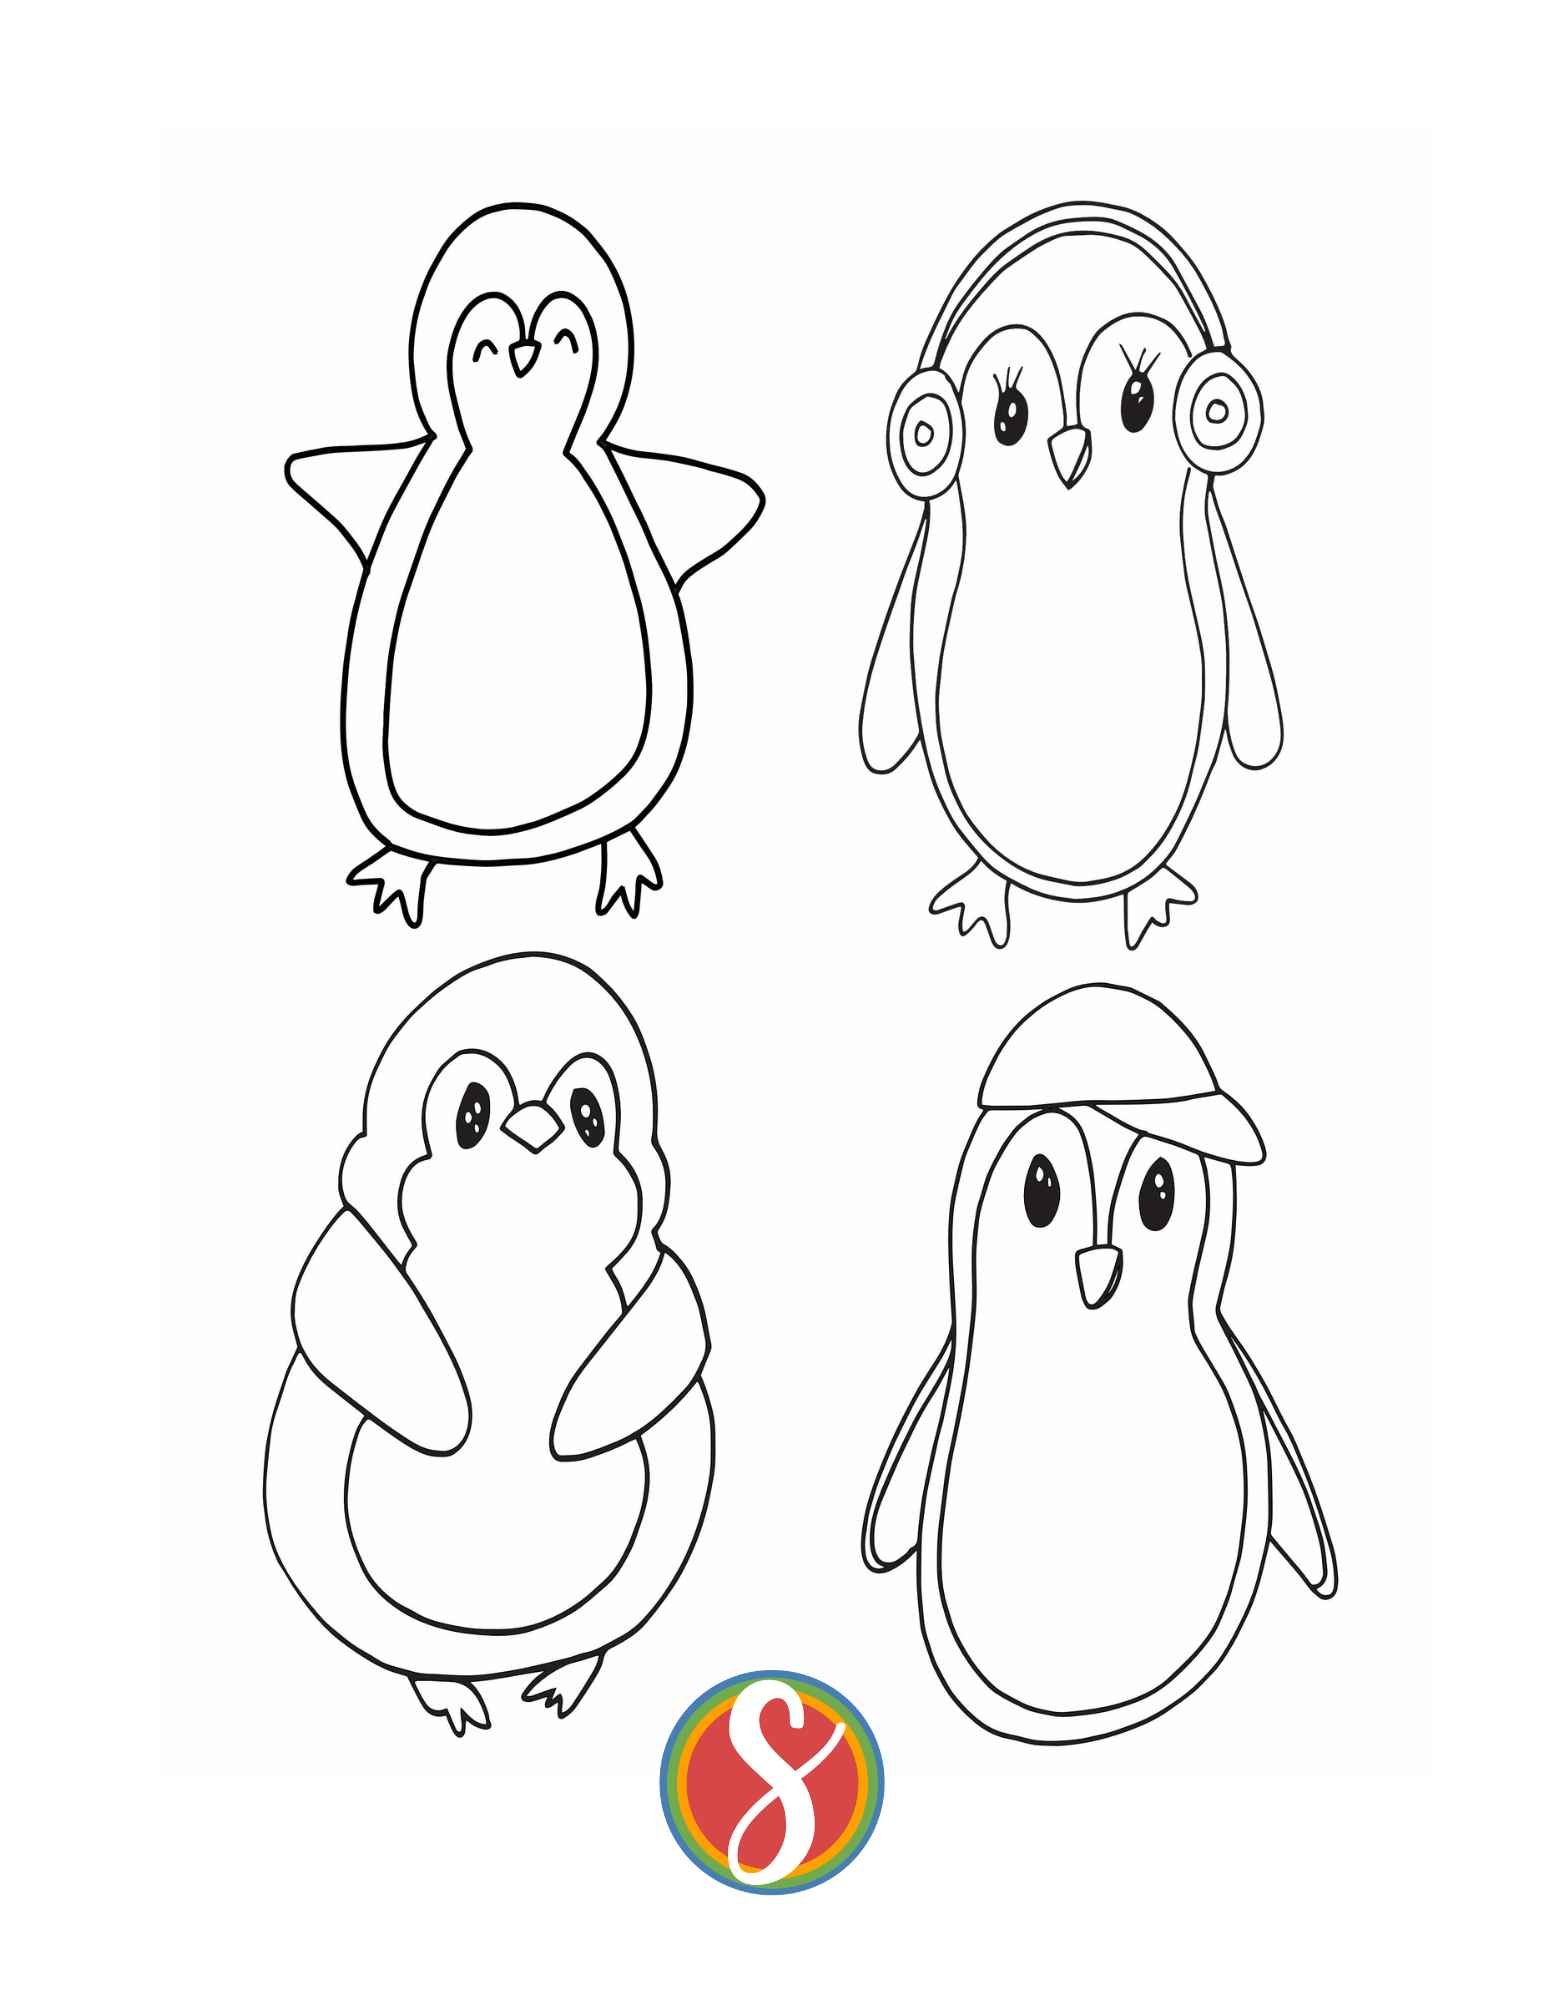 A coloring page with 4 simple penguin images. Top left is a simple penguin with wings out and arms closed, top right is a simple penguin with long lashes and headphones, bottom left is a plump penguin, bottom right is a penguin in a baseball cap